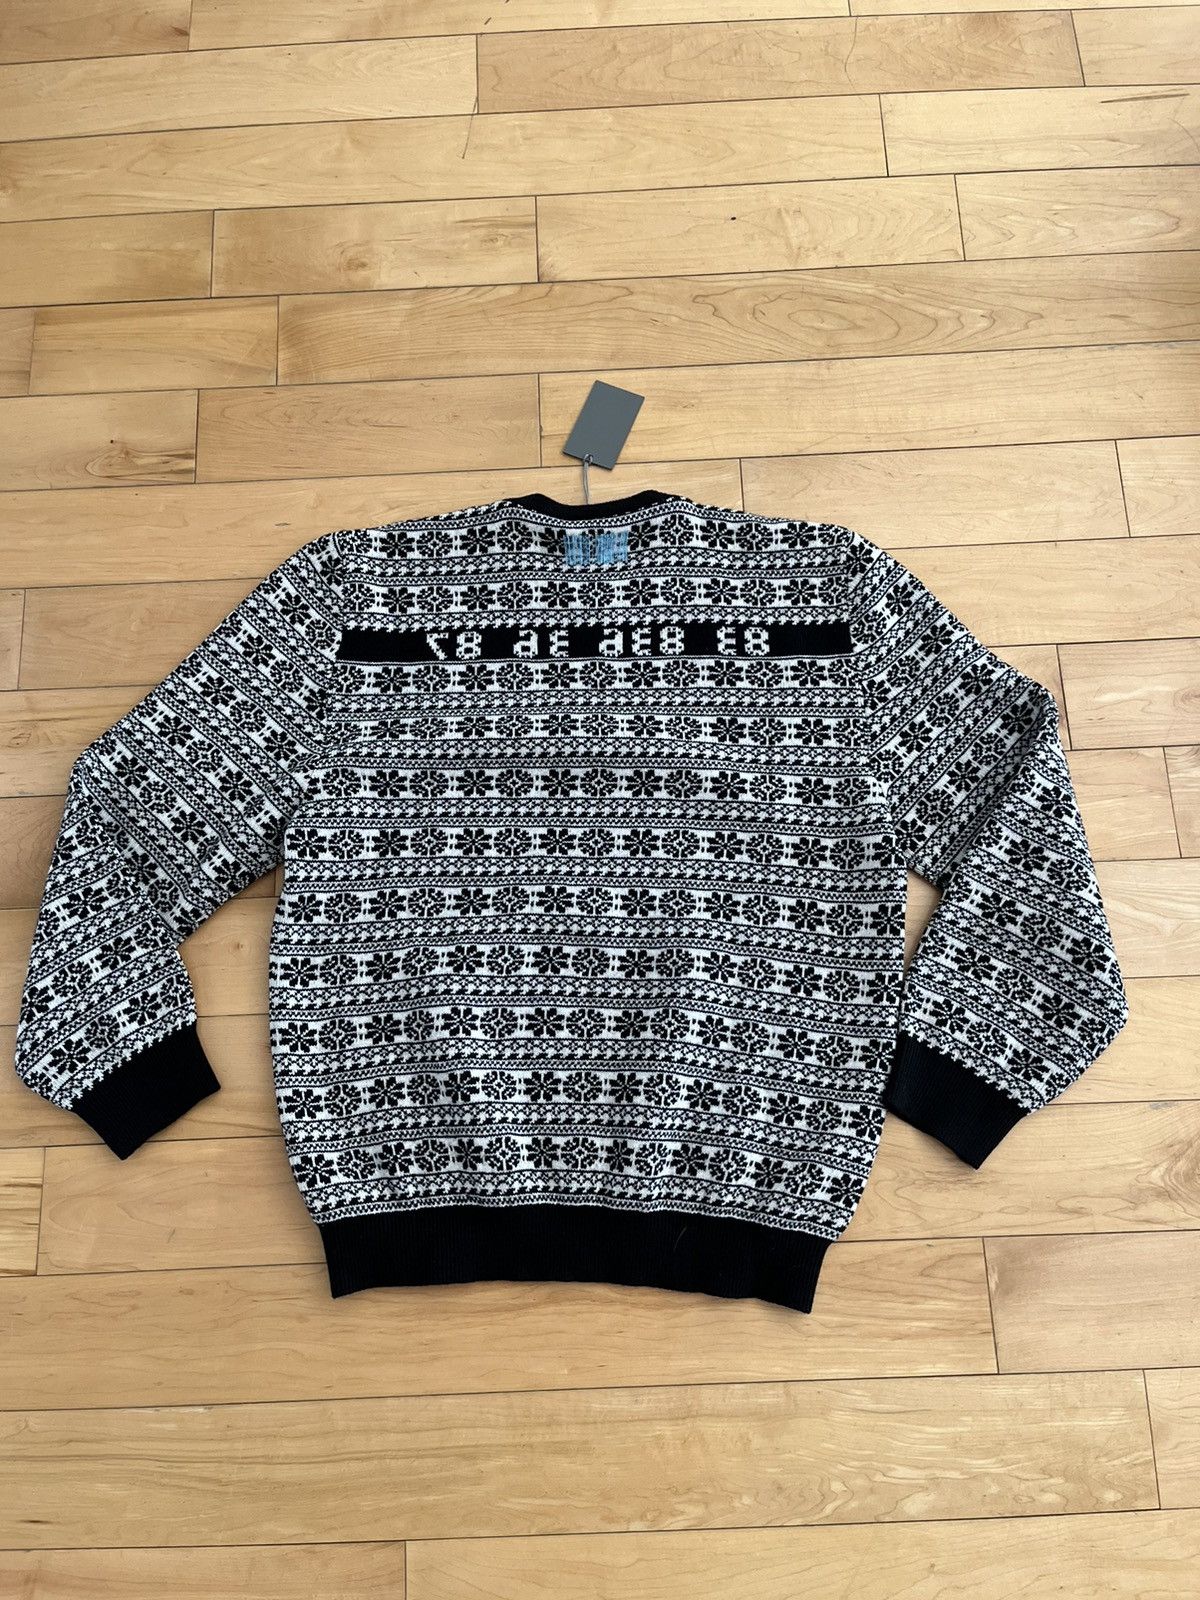 NWT - VTMNTS Number Nordic Sweater - 2